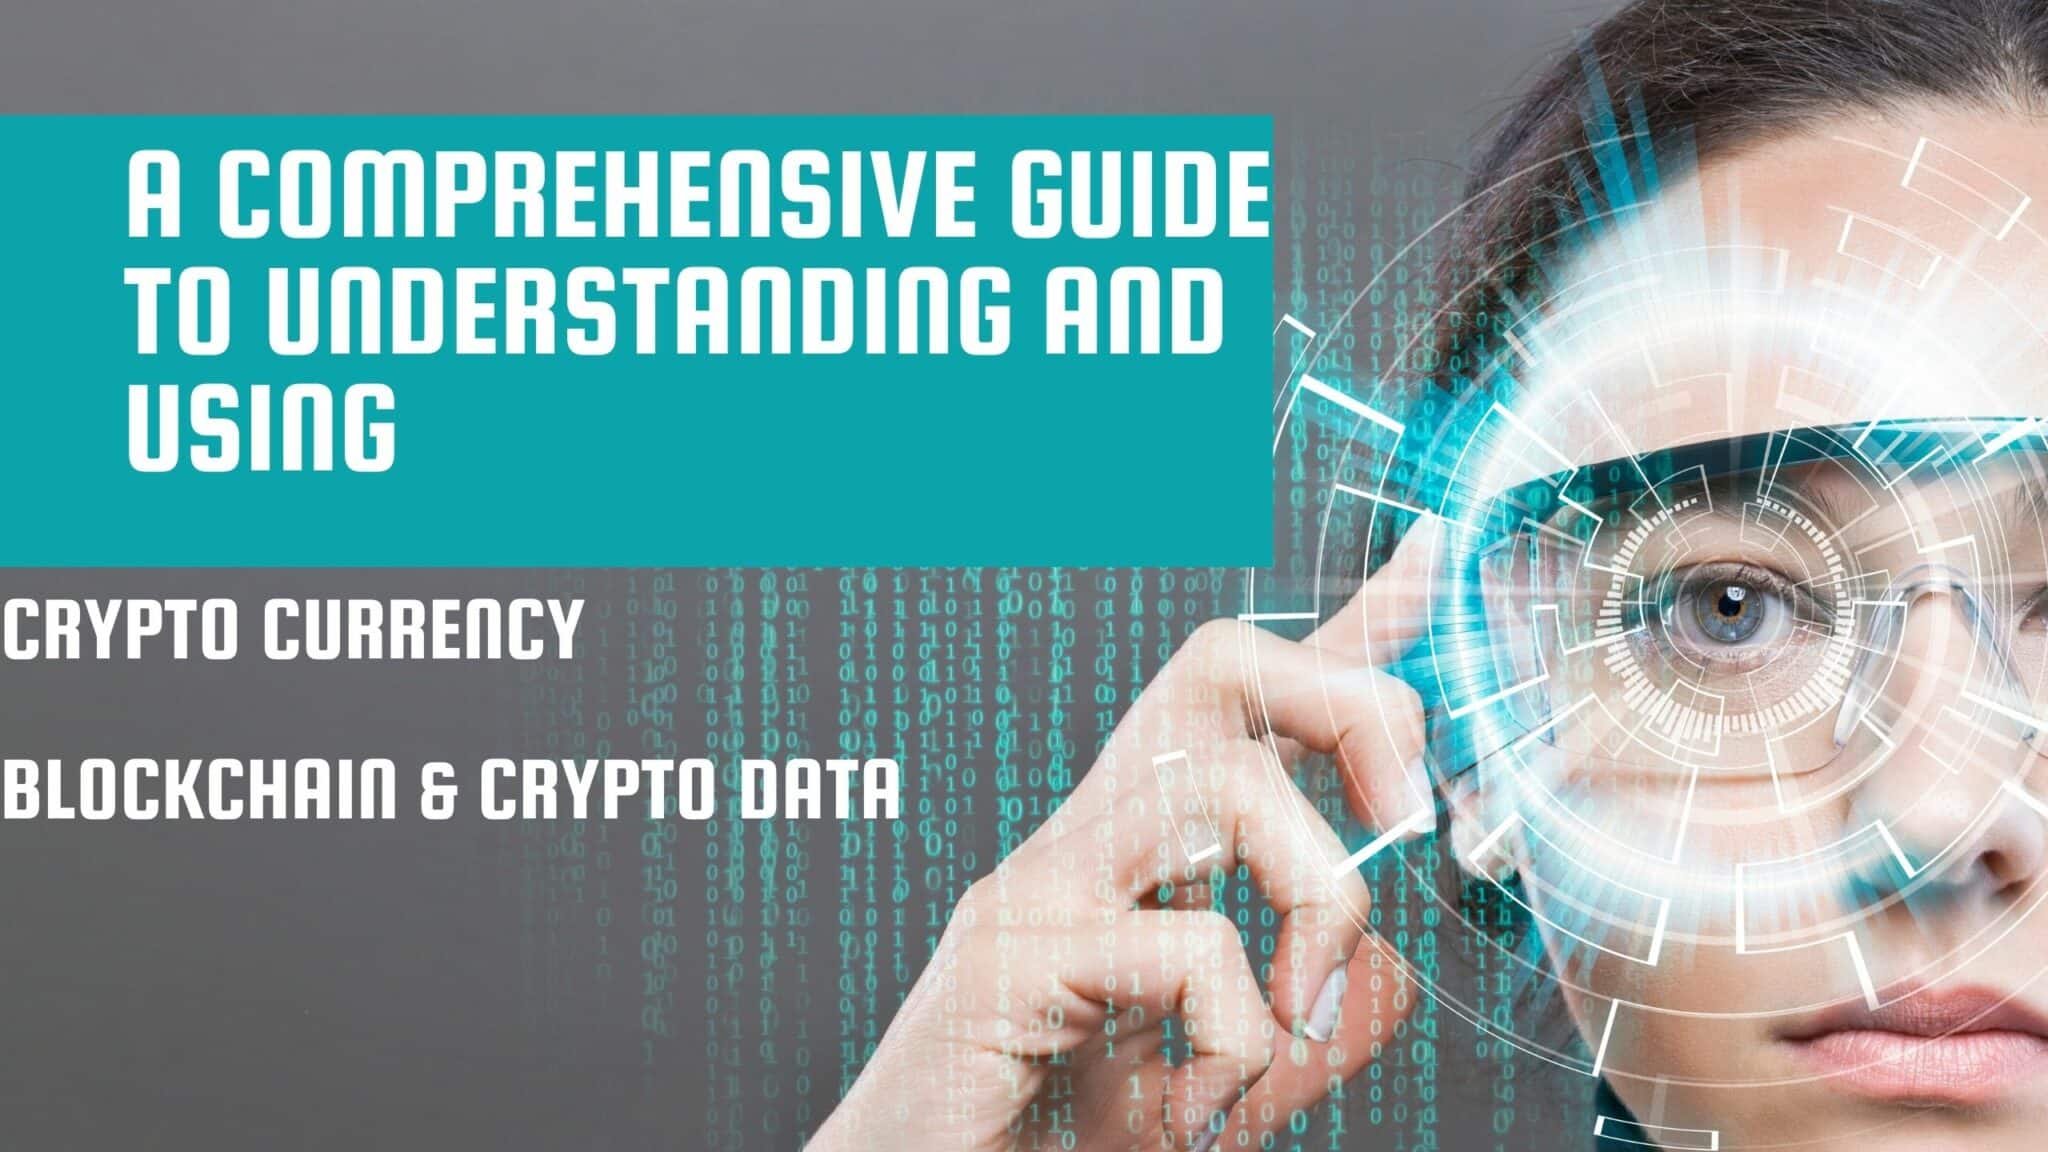 A Comprehensive Guide to Understanding and Using Crypto Currency, Blockchain & Crypto Data